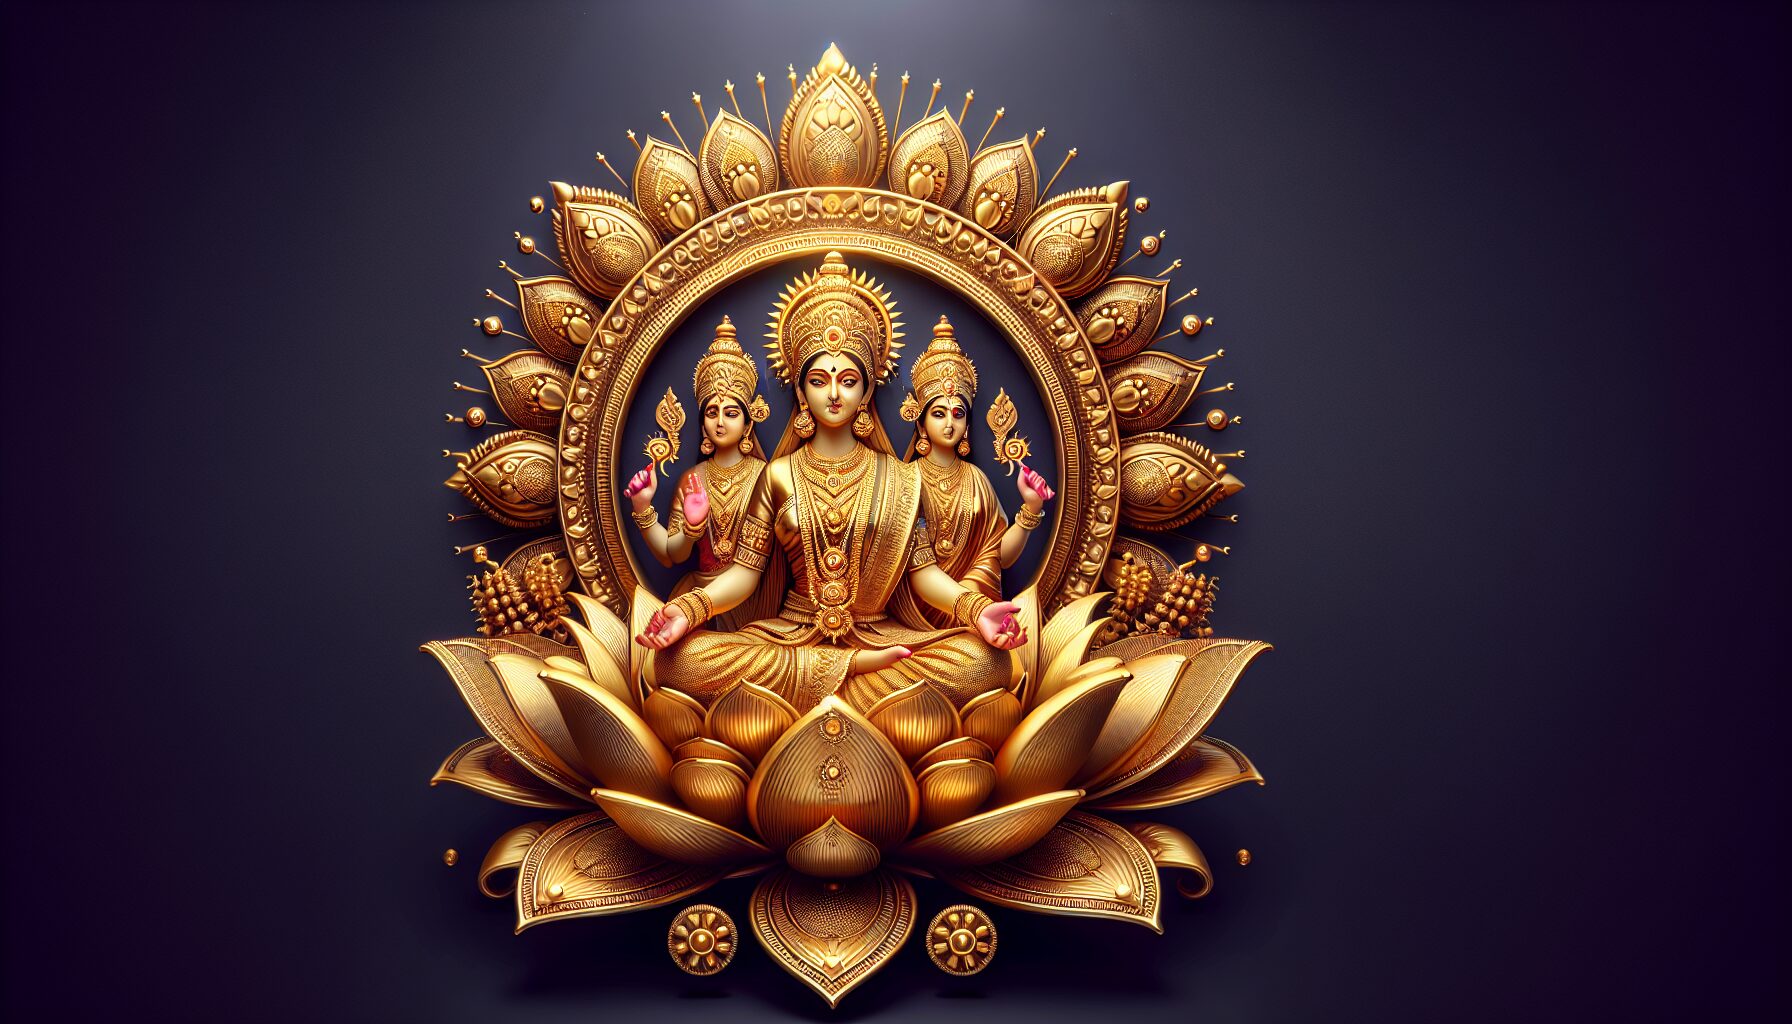 What Are The Manifestations Of Lakshmi As Shridevi And Padma?